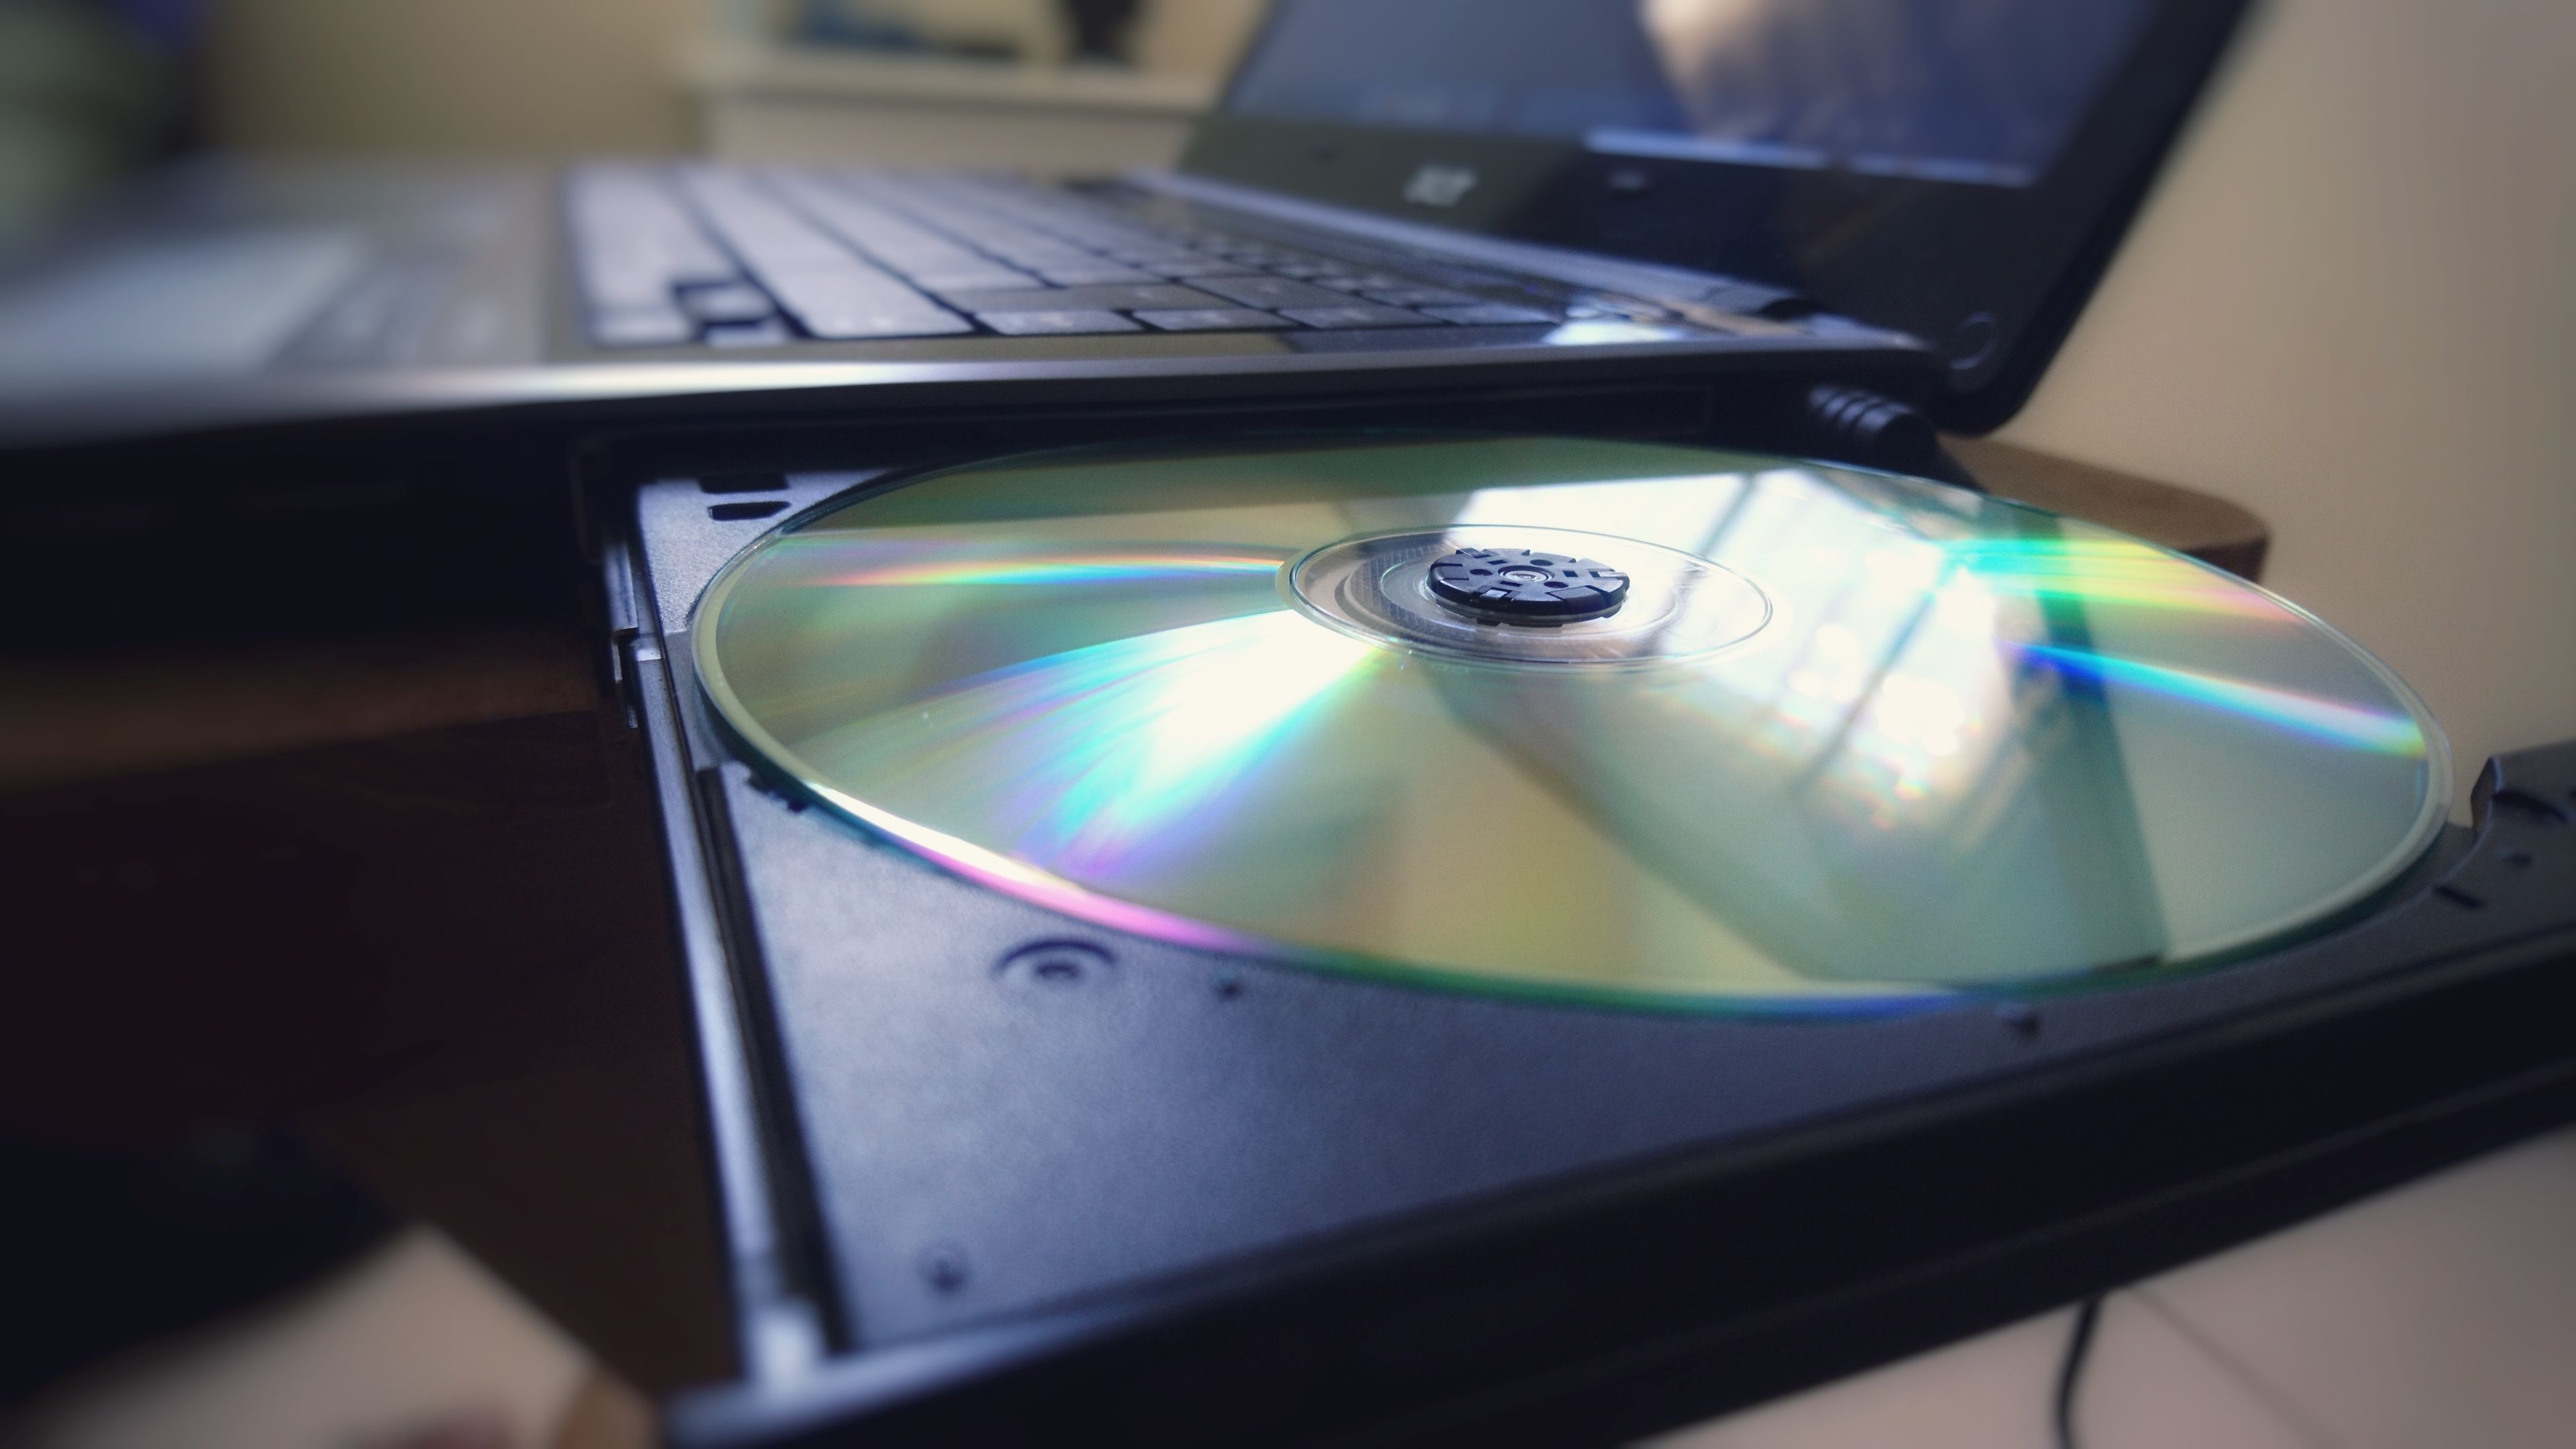 The Best Free CD/DVD Burning Software